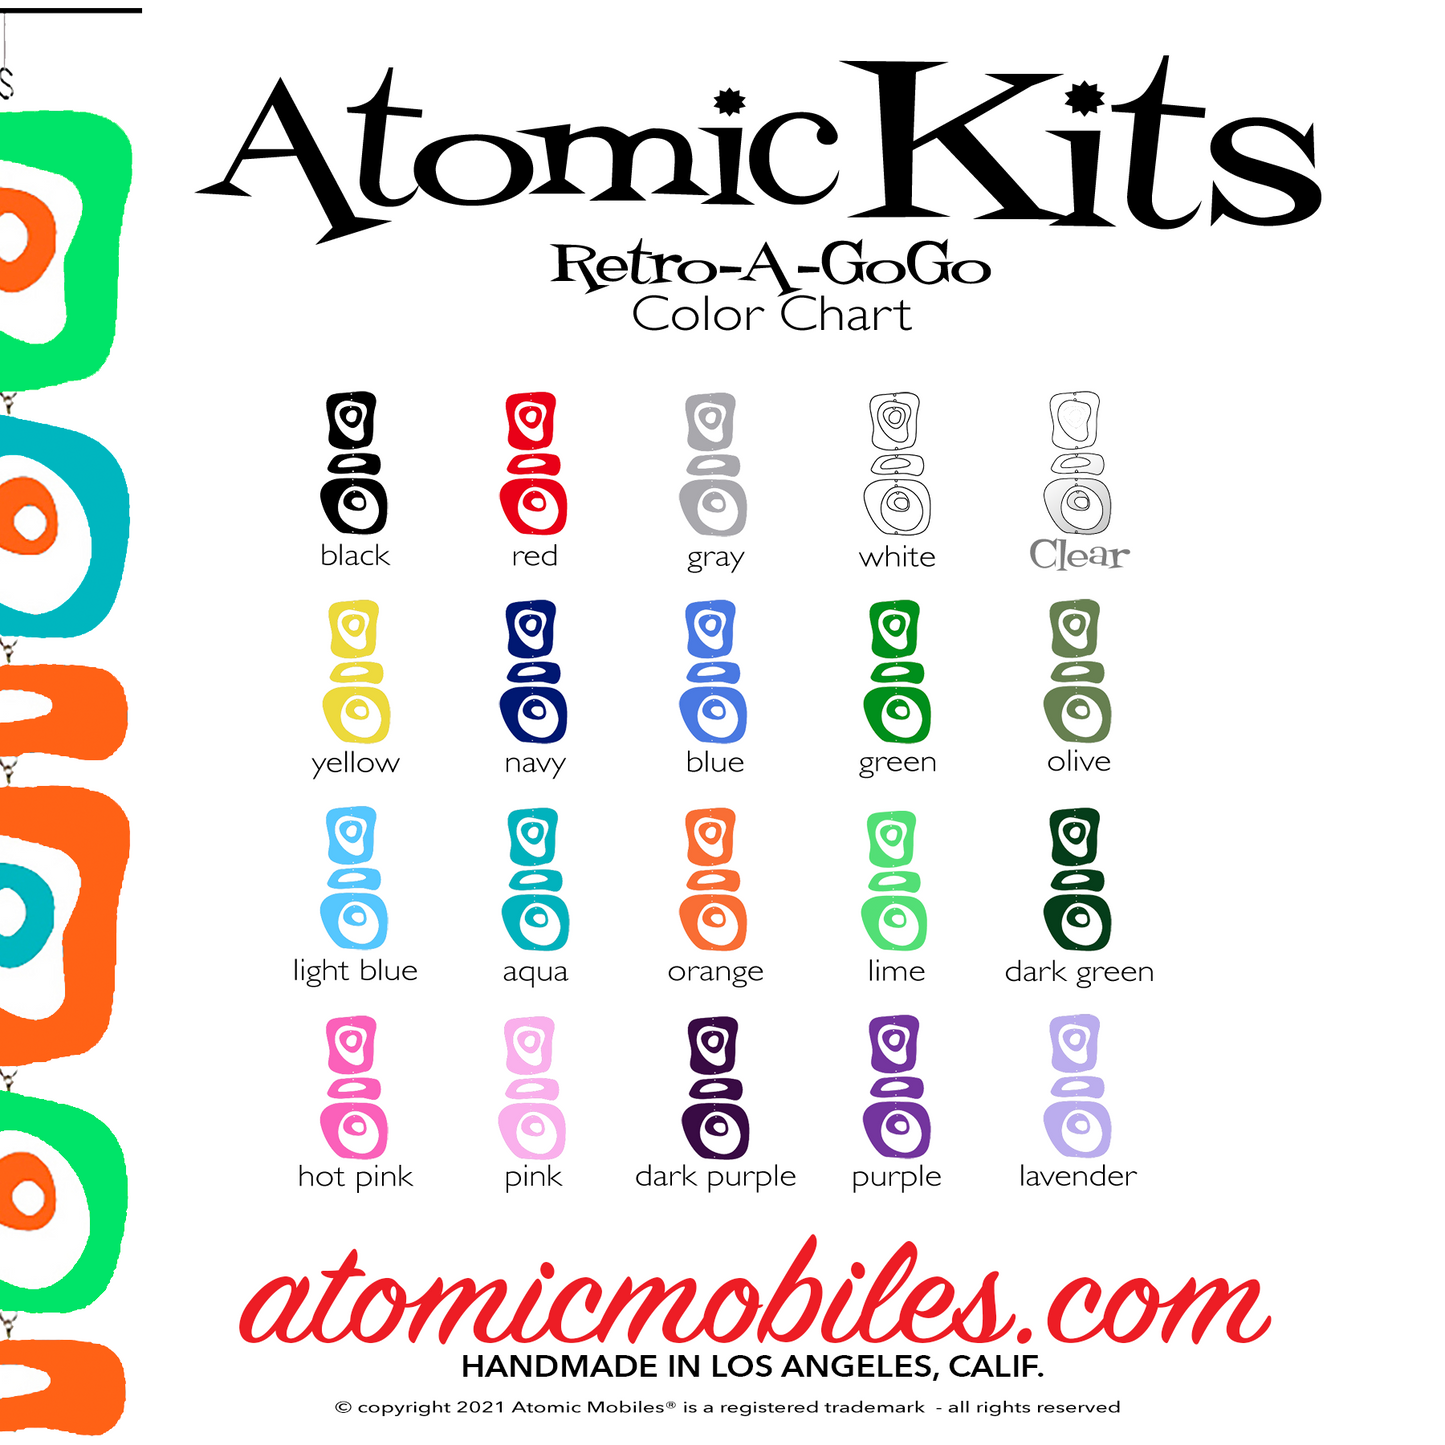 Retro-A-GoGo Atomic Kits Color Chart by AtomicMobiles.com